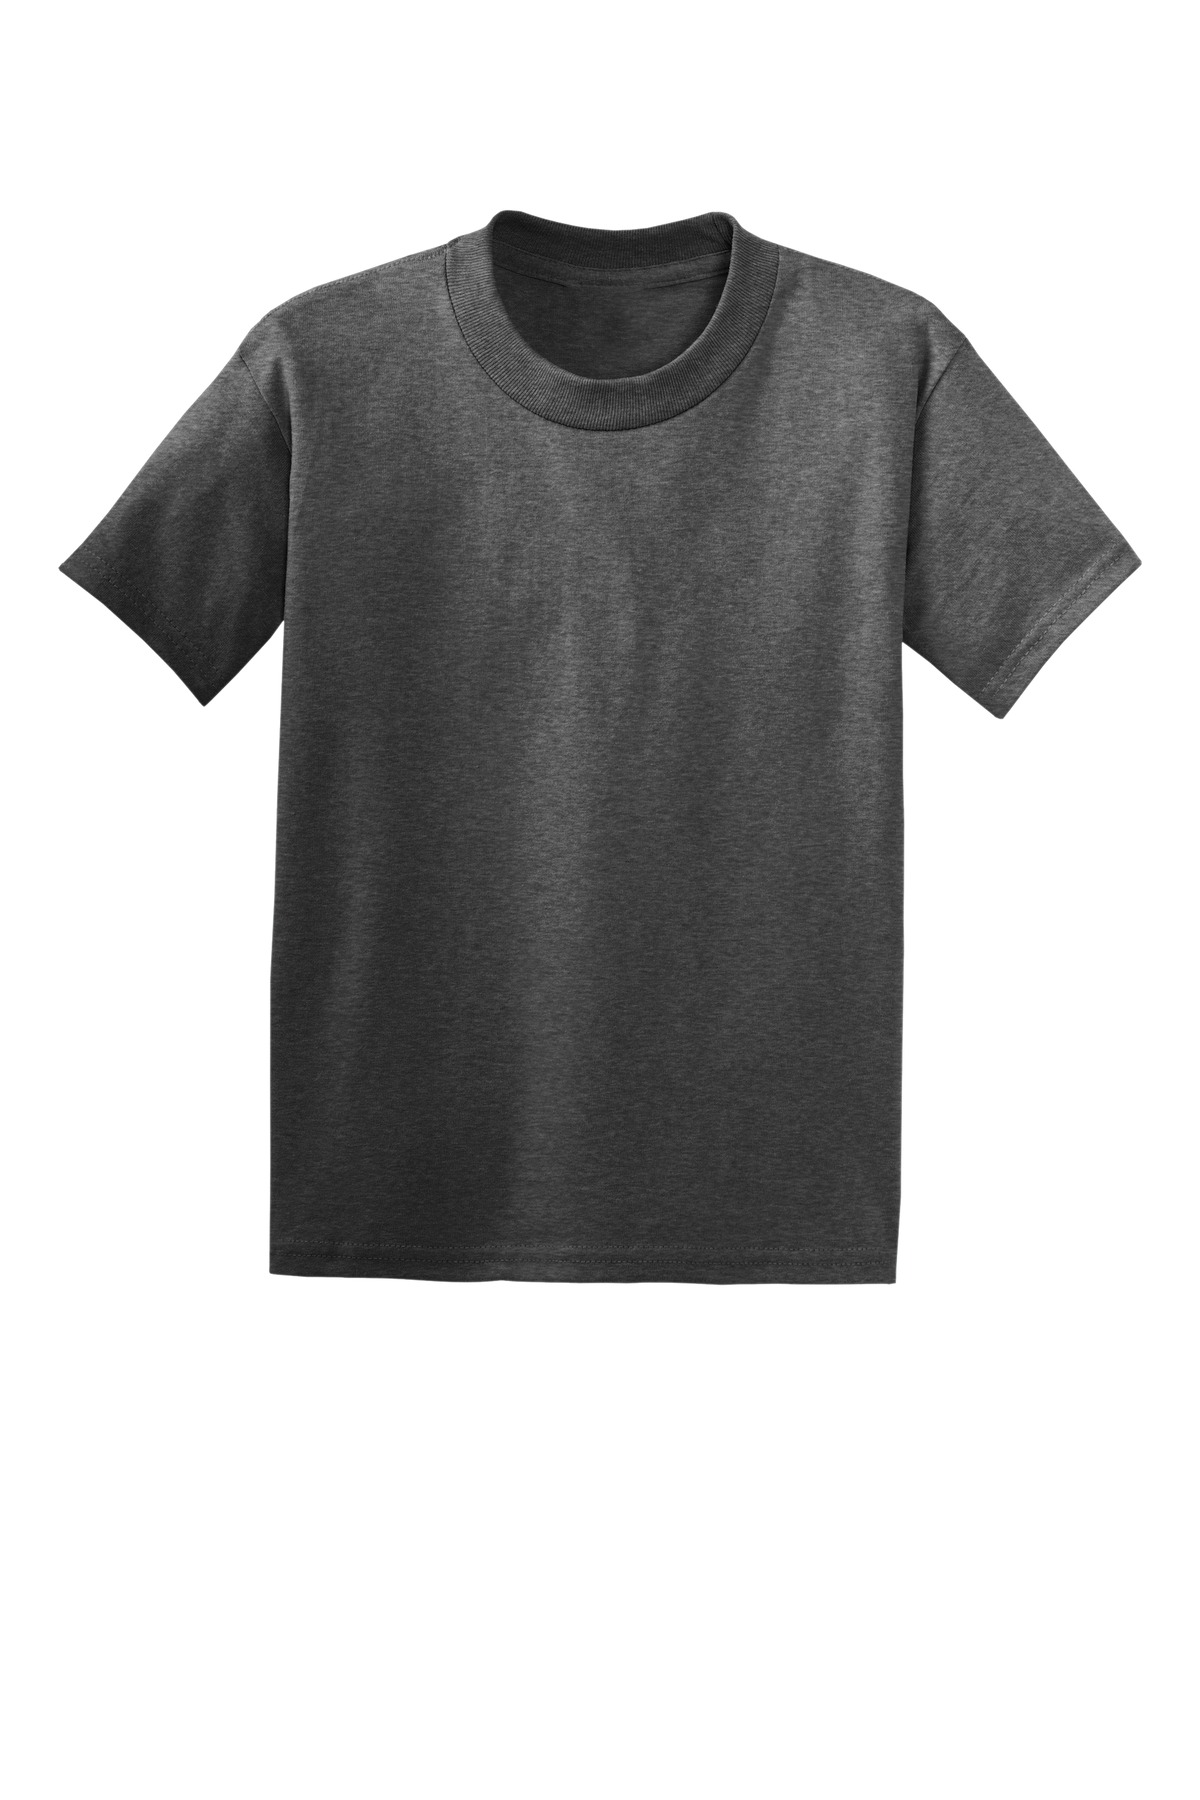 Hanes- Youth EcoSmart 50/50 Cotton/Poly T-Shirt - 5370